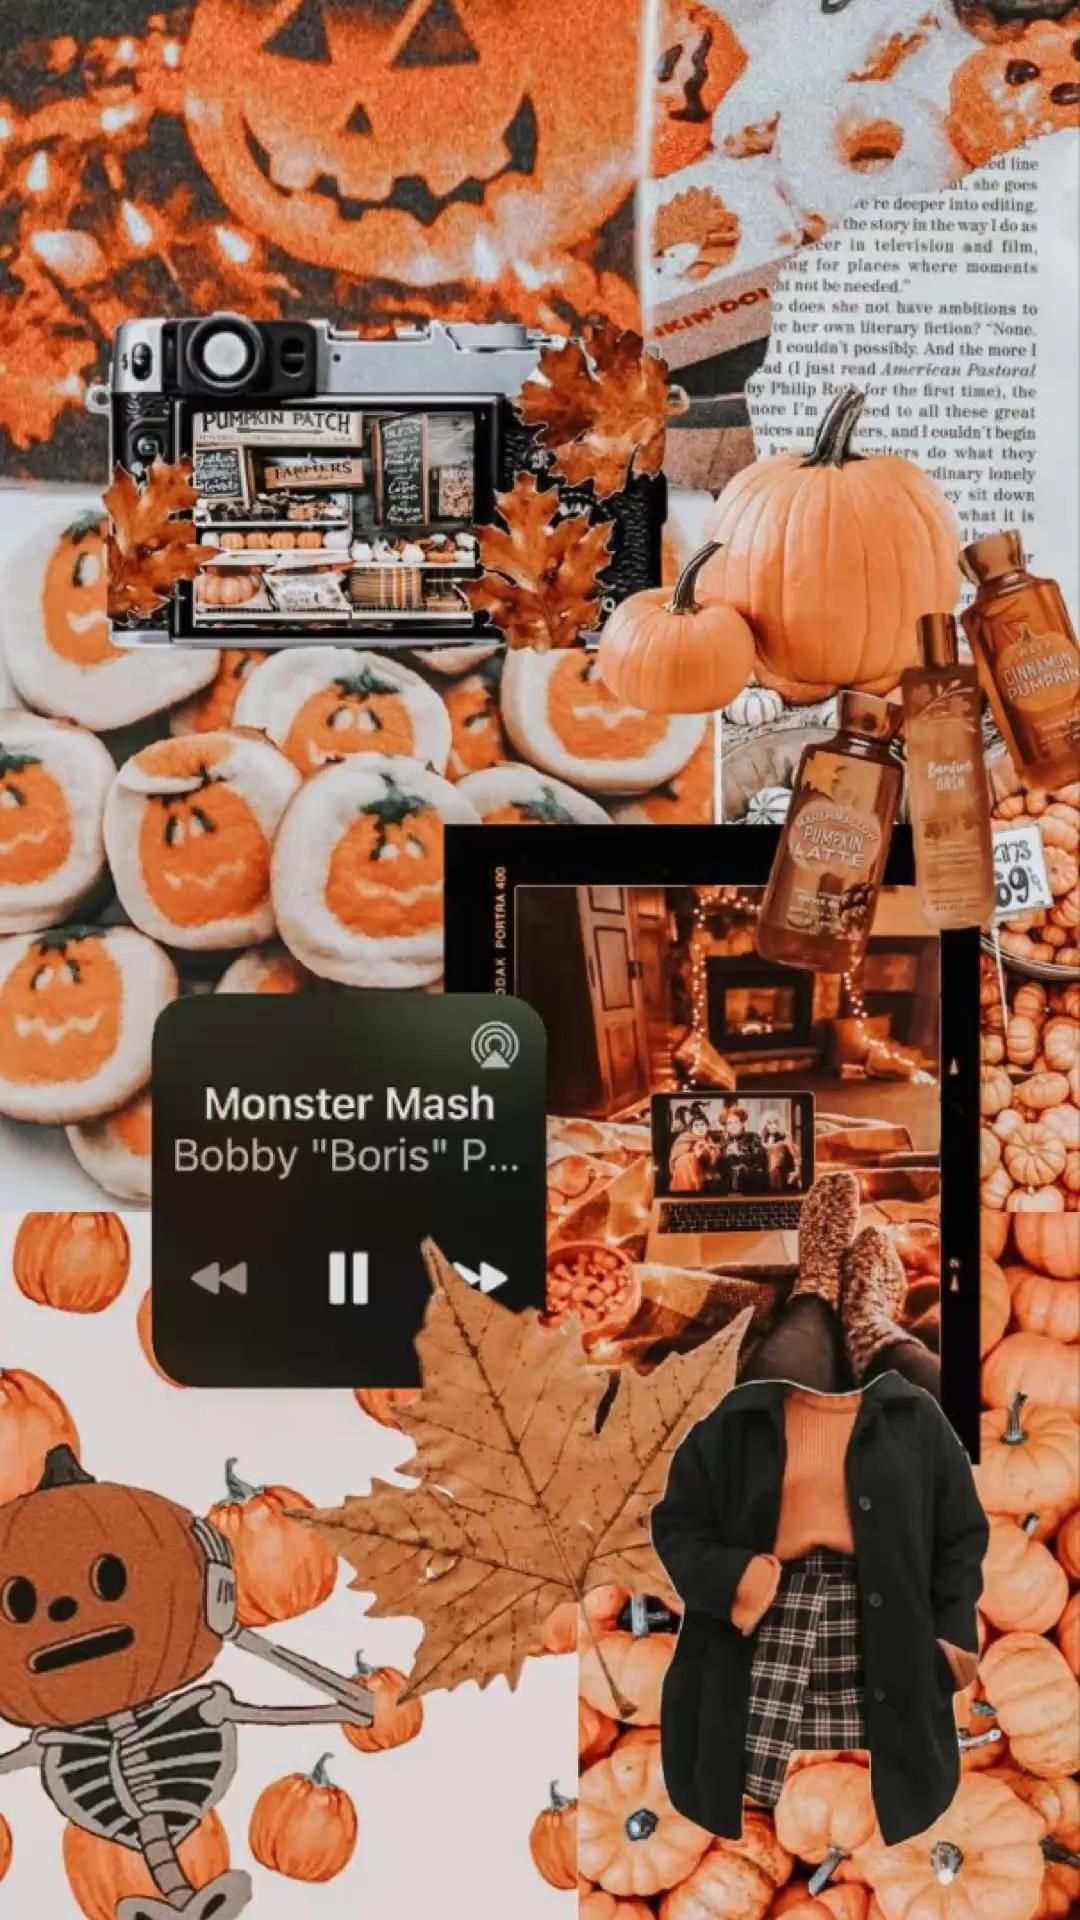 Aesthetic Halloween wallpaper with pumpkins, leaves, and a music player. Perfect for your phone or desktop background. Tags: Halloween Aesthetic, Fall Aesthetic, Halloween, Wallpaper. - Halloween, cute Halloween